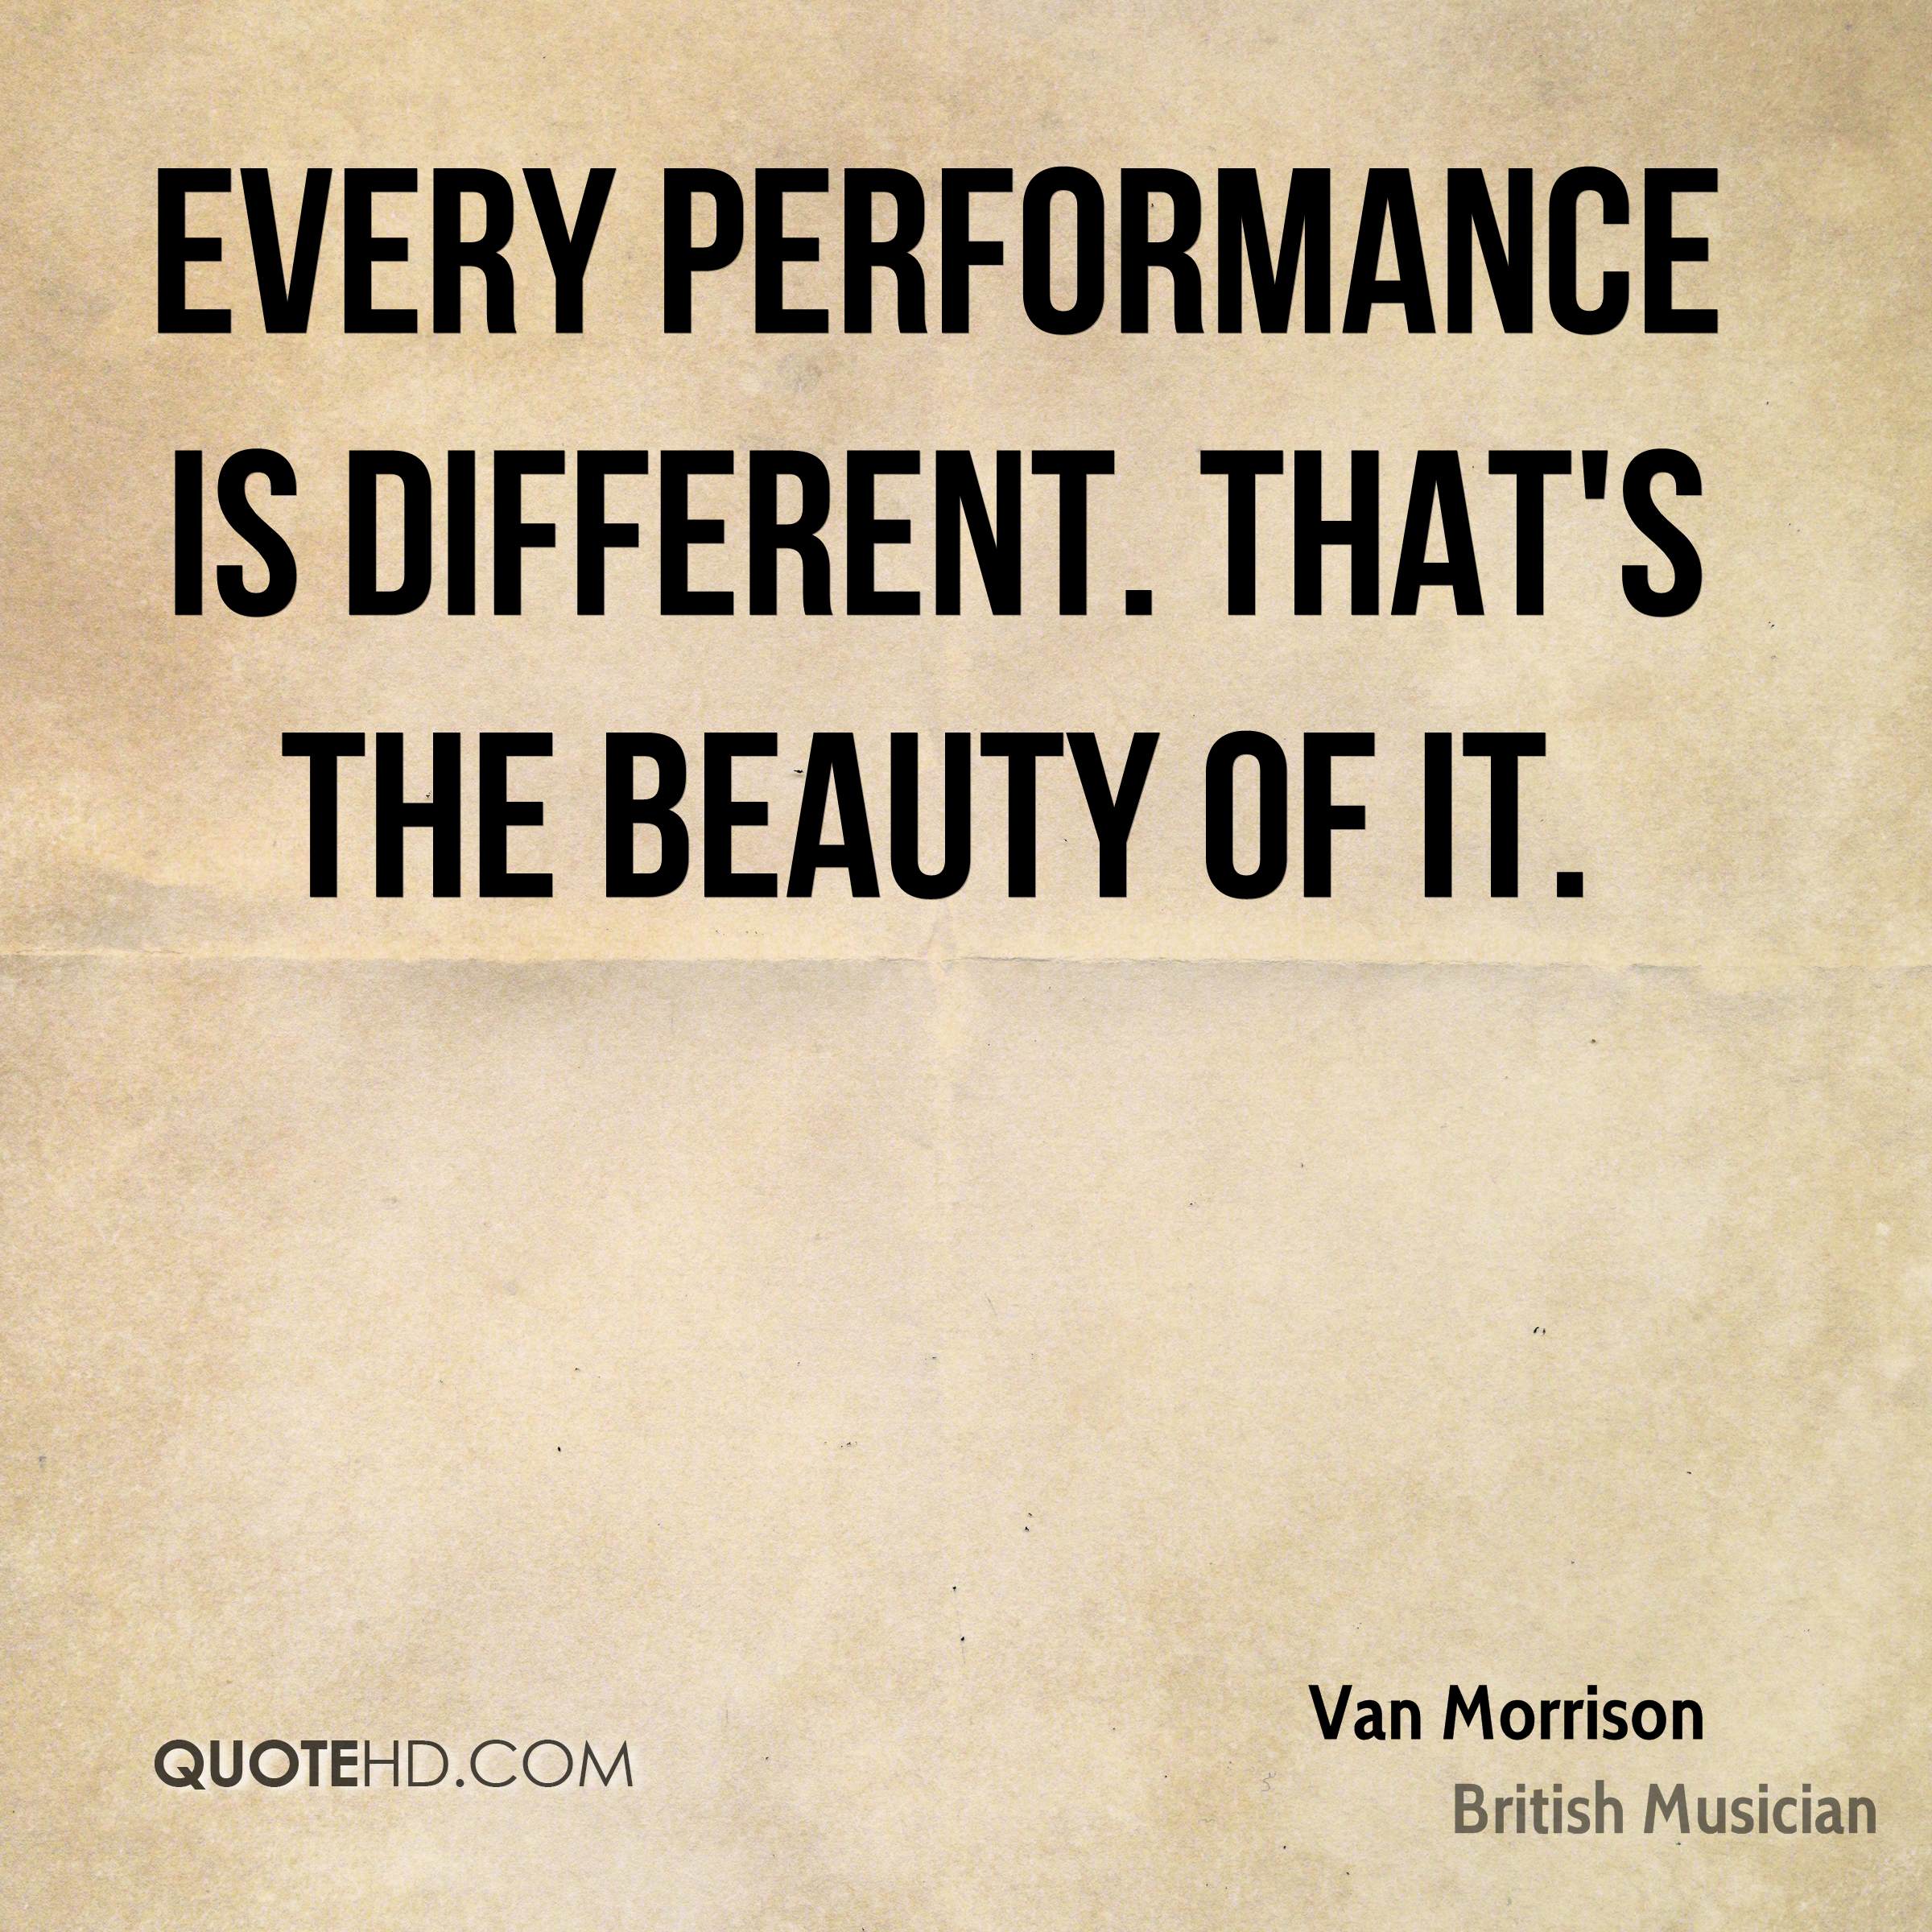 Every performance is different. That's the beauty of it. Van Morrison